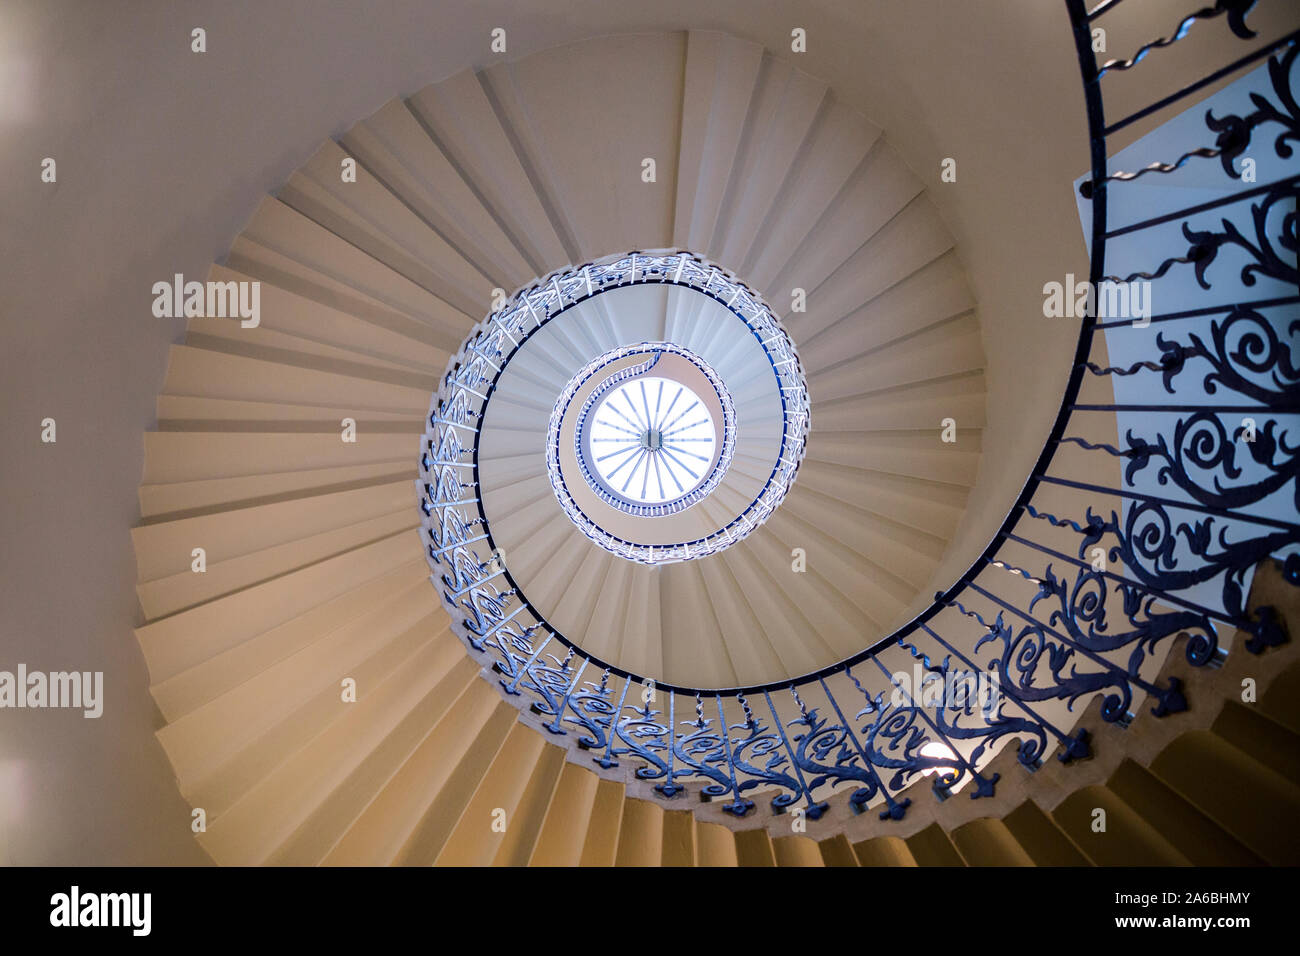 The Tulip Stairs spiral self supporting staircase in the Queen's House – England's first truly classical building –  in Greenwich. London. UK. (105) Stock Photo